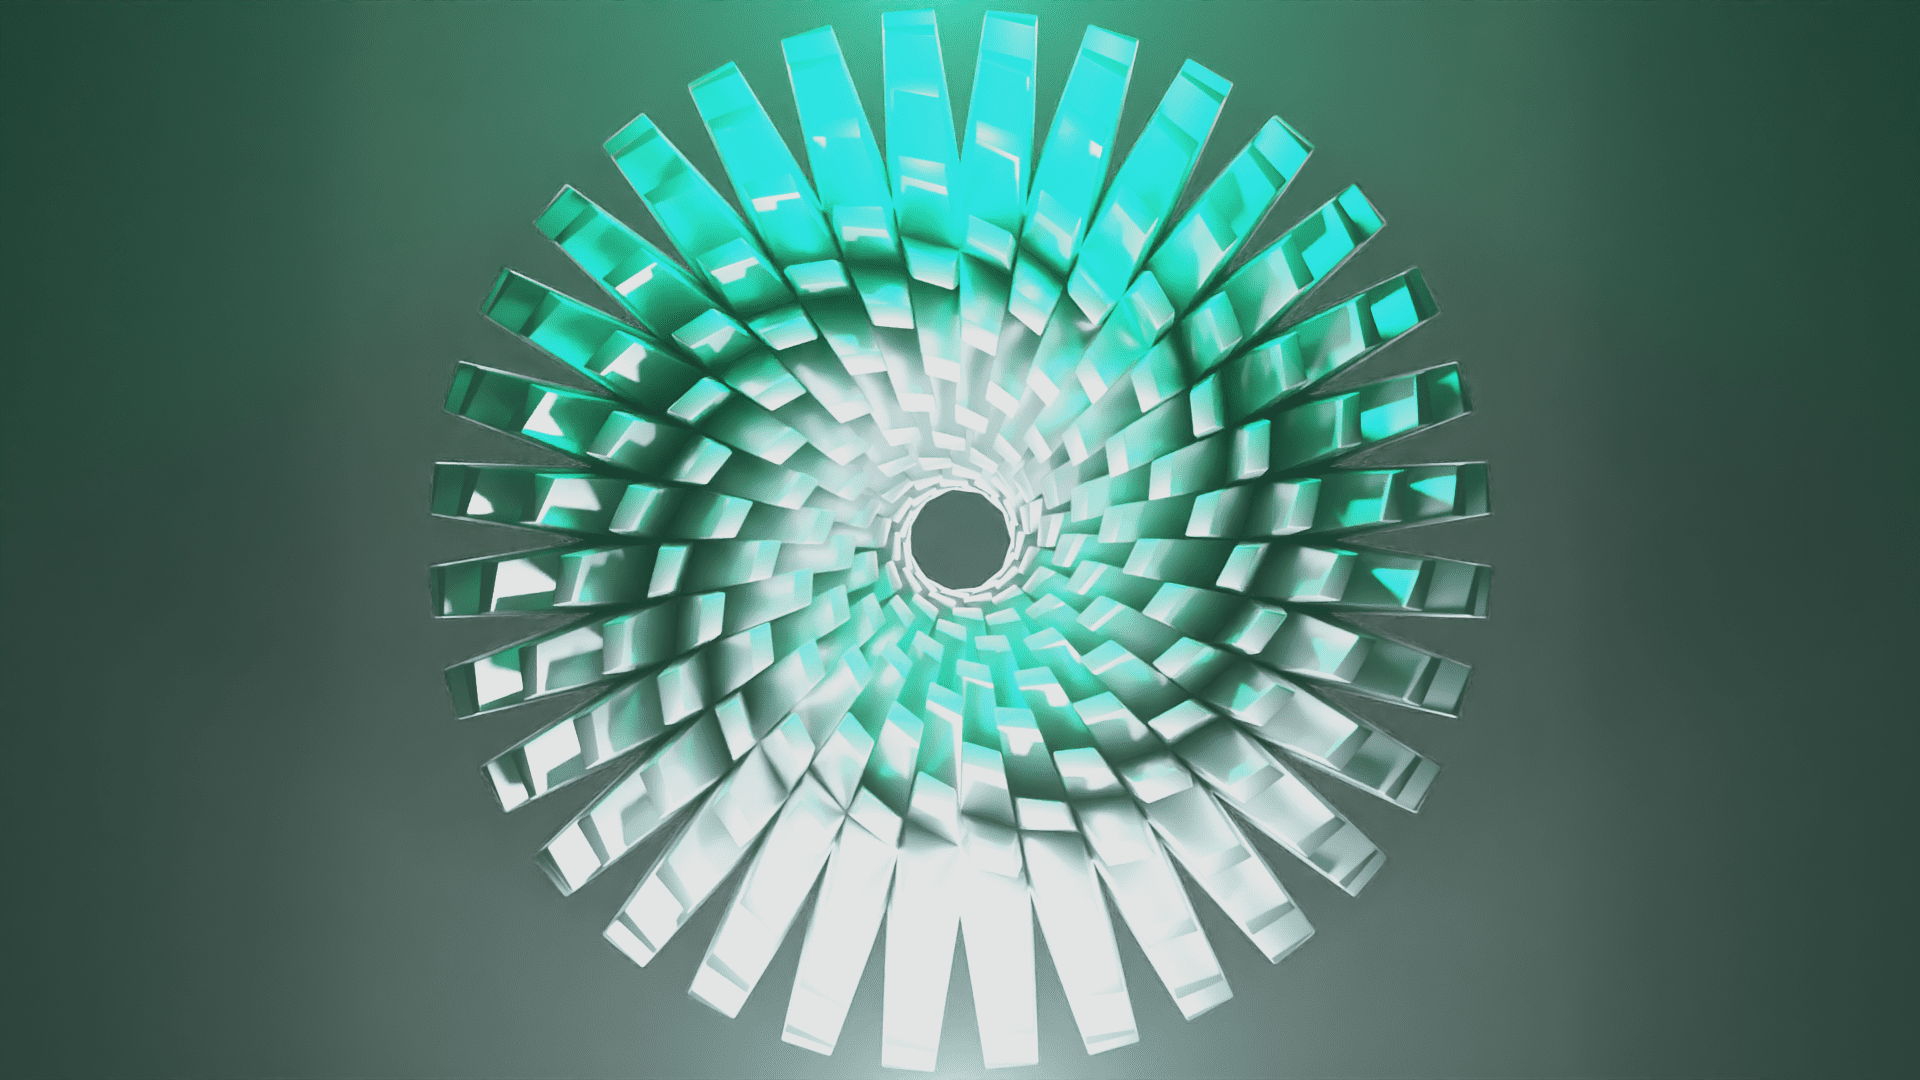 a cyan and white lighting of the spiral object